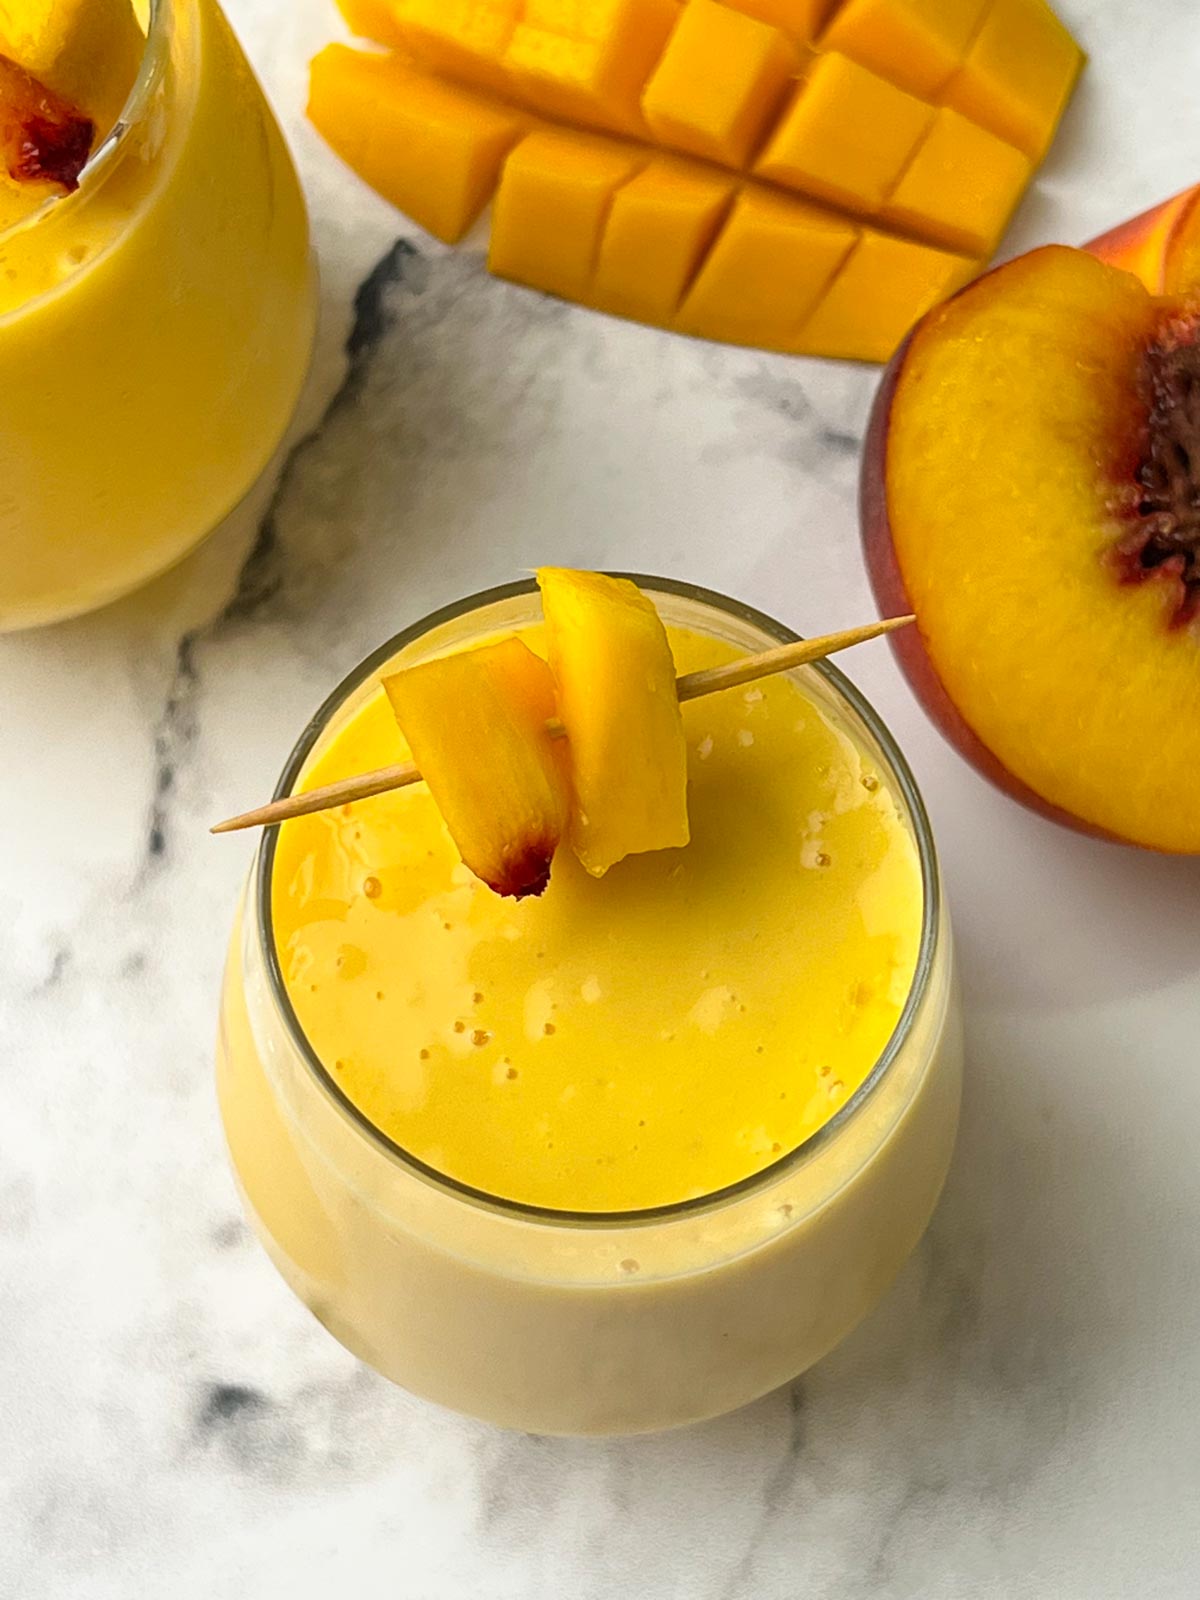 mango peach smoothie recipe served in a juice glass garnished with pieces of fruits in a toothpick